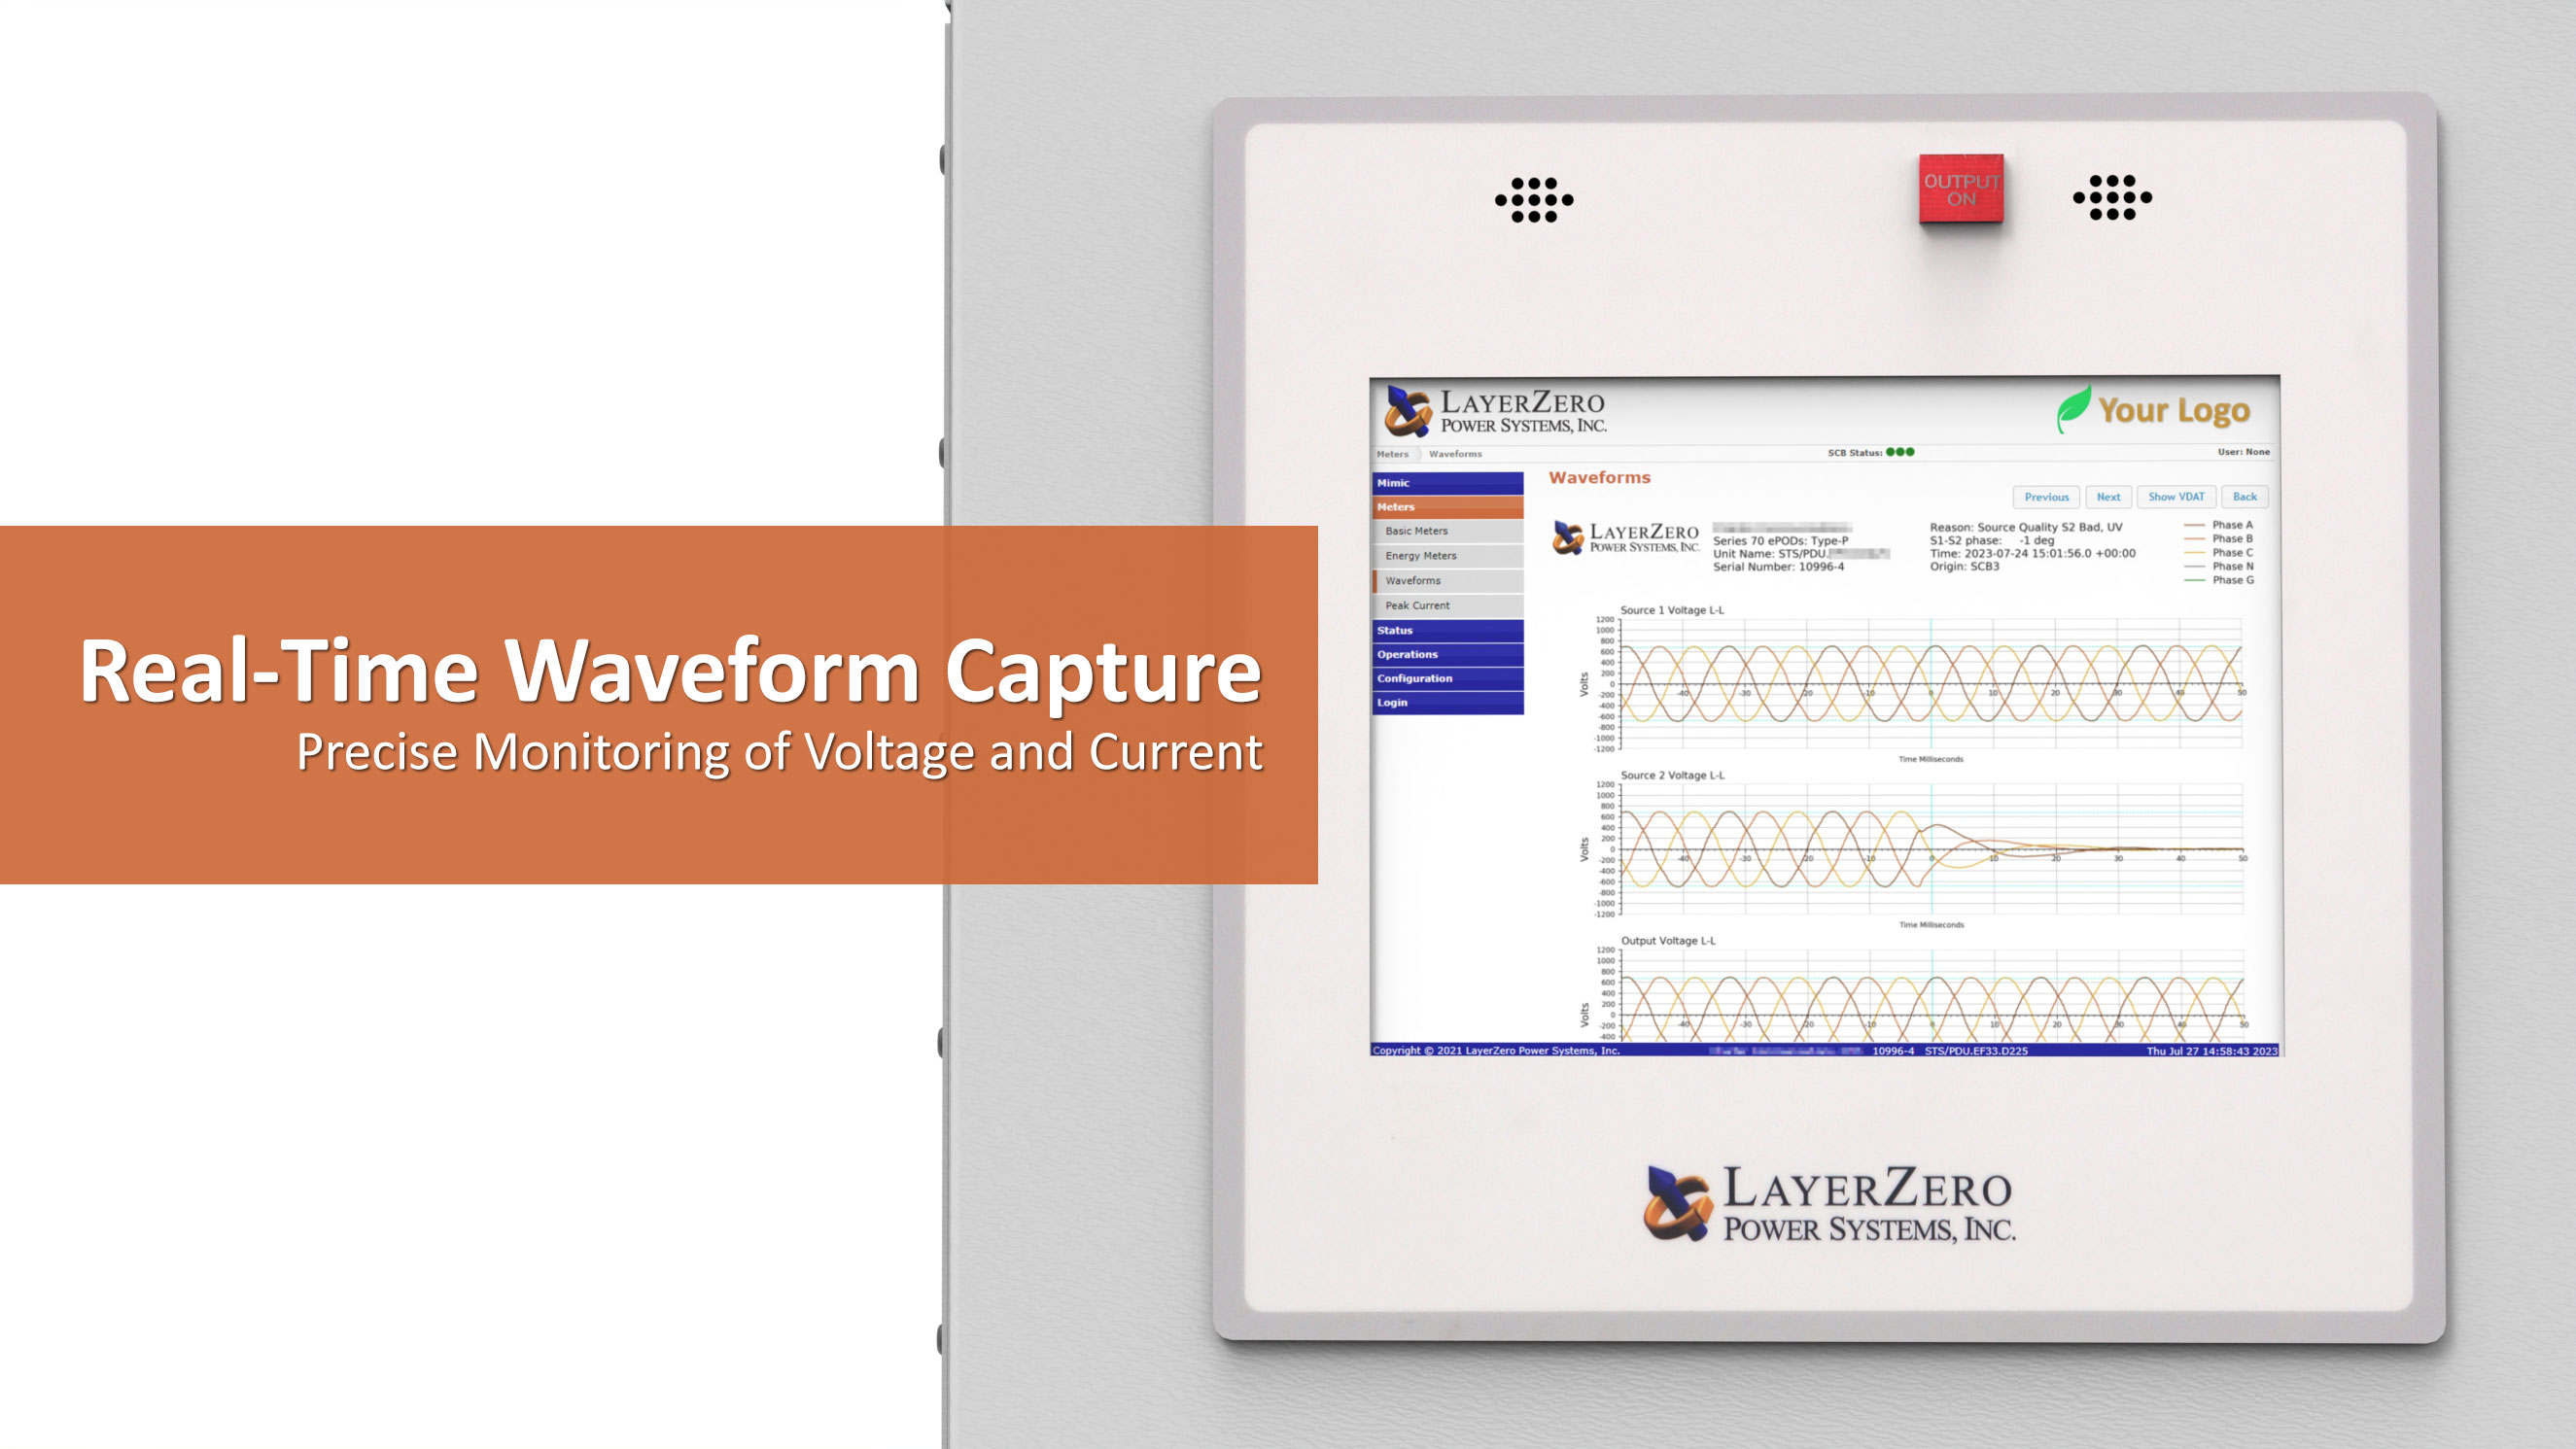 Real-Time Waveform Capture in the LayerZero eSTS Static Transfer Switch